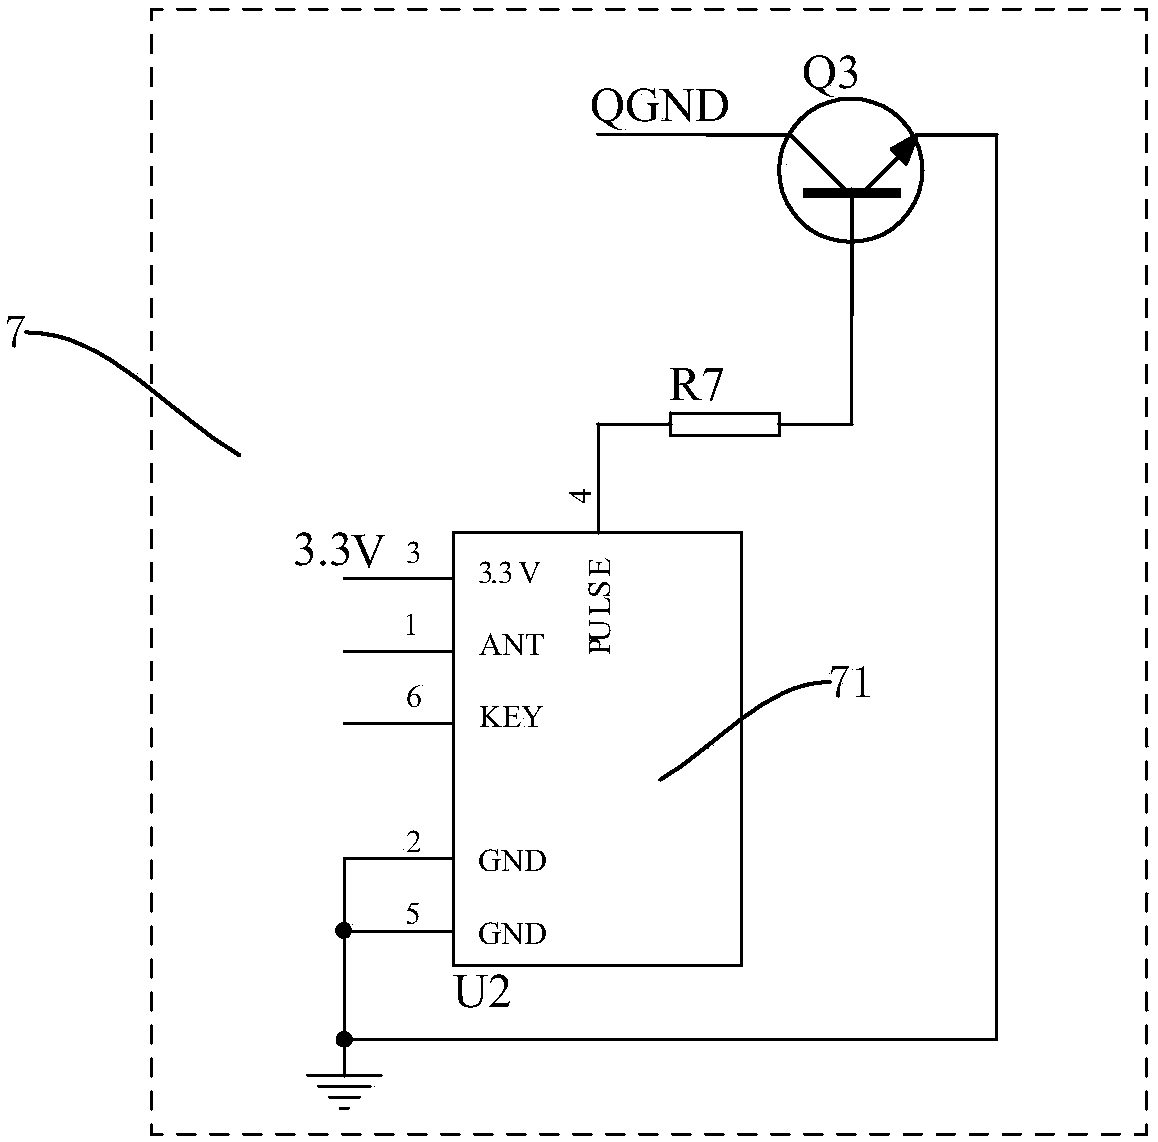 PWM (Pulse-Width Modulation) modulated LED drive circuit having power-off memory function